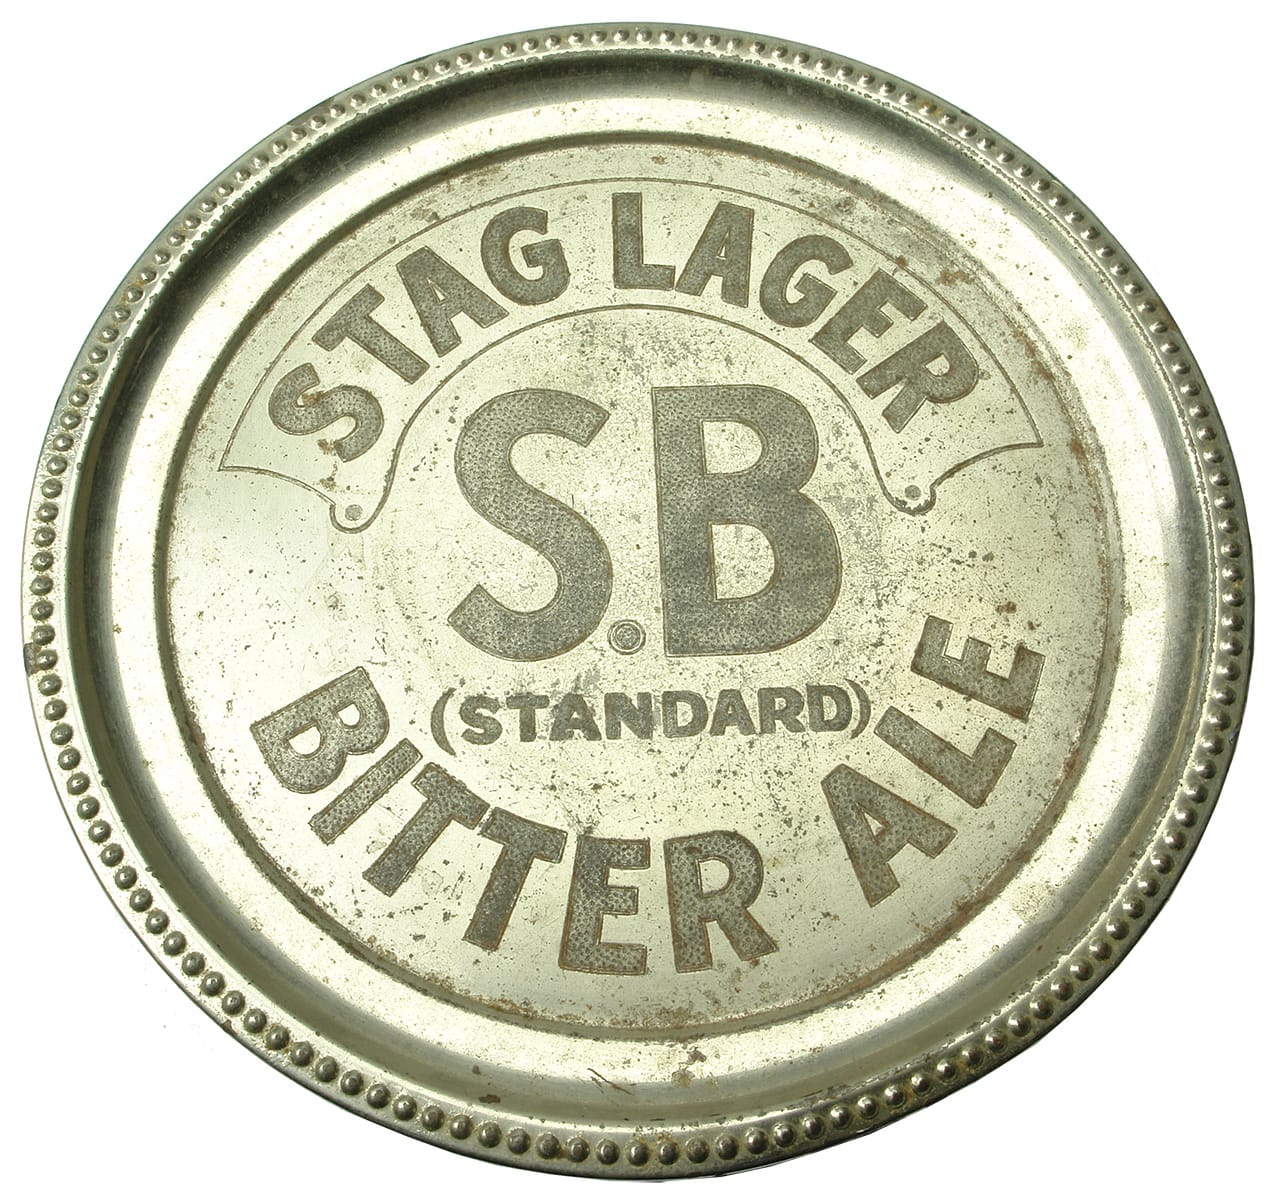 Stag Lager Bitter Ale Serving Tray